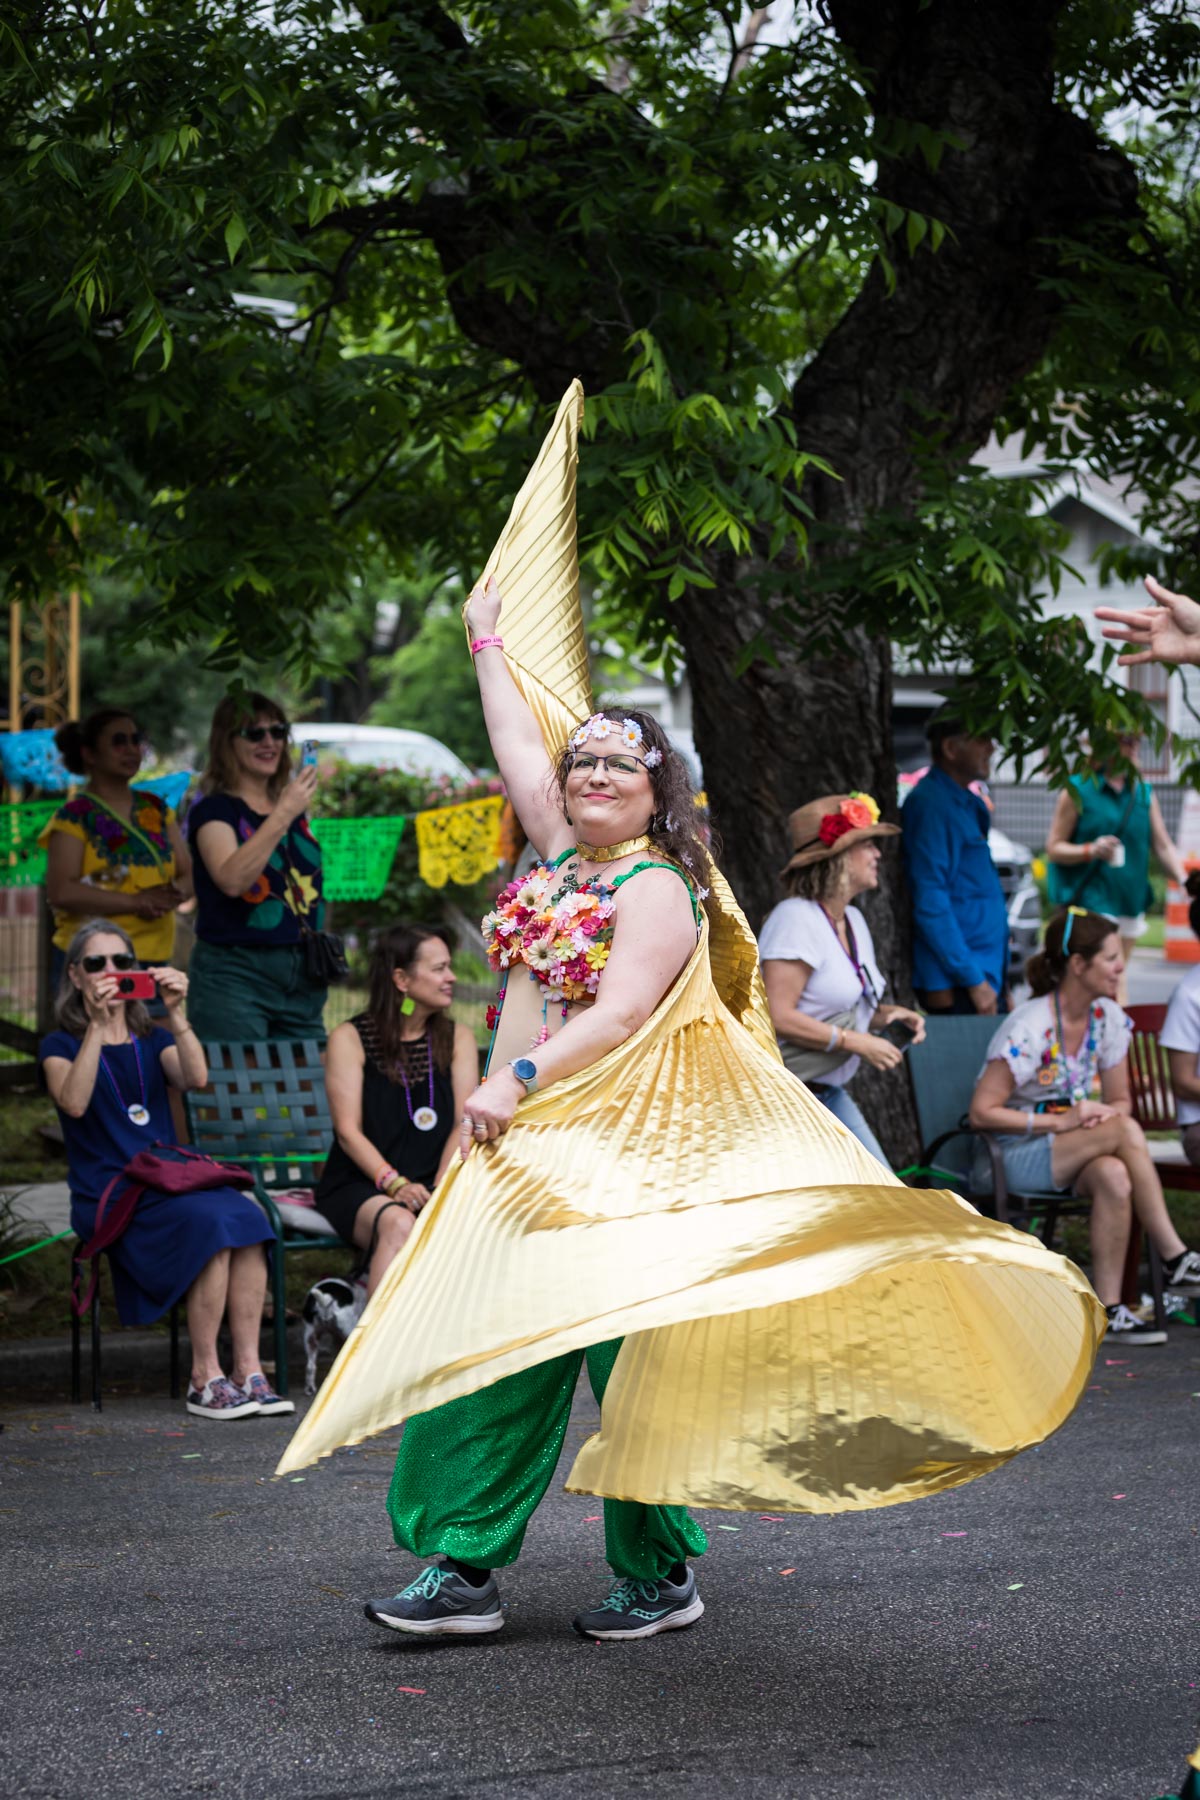 Woman twirling gold cape during King William Fair for an article on the Fiesta photo tips